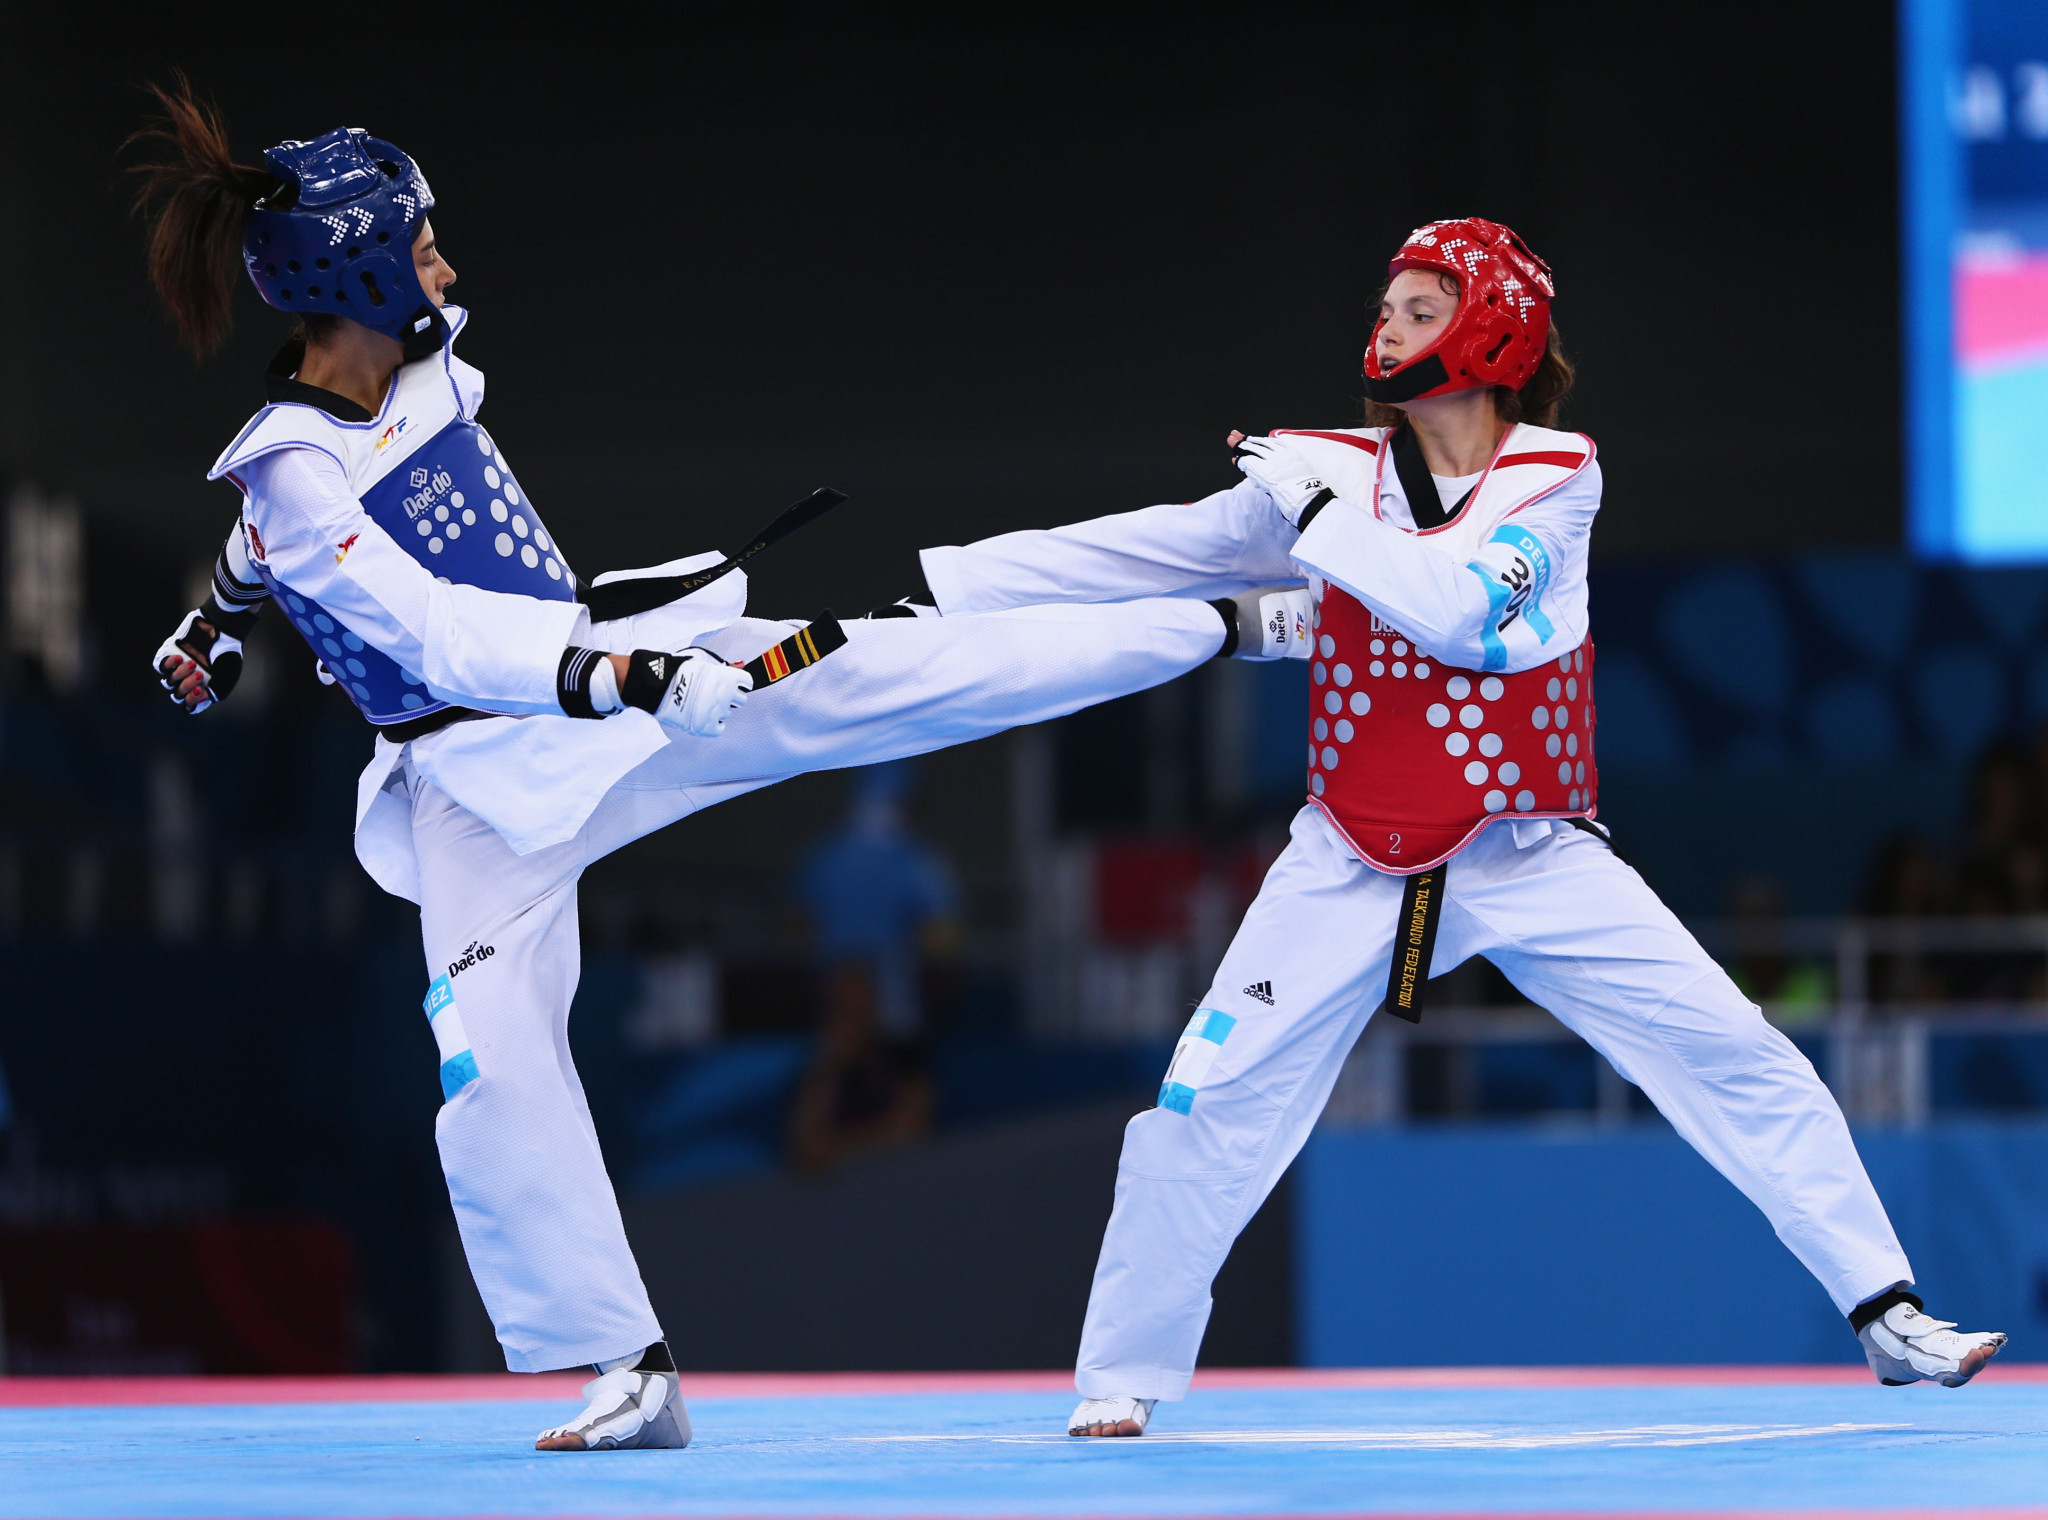 Athletes and officials from 15 countries are featuring at the competition in Islamabad ©Getty Images